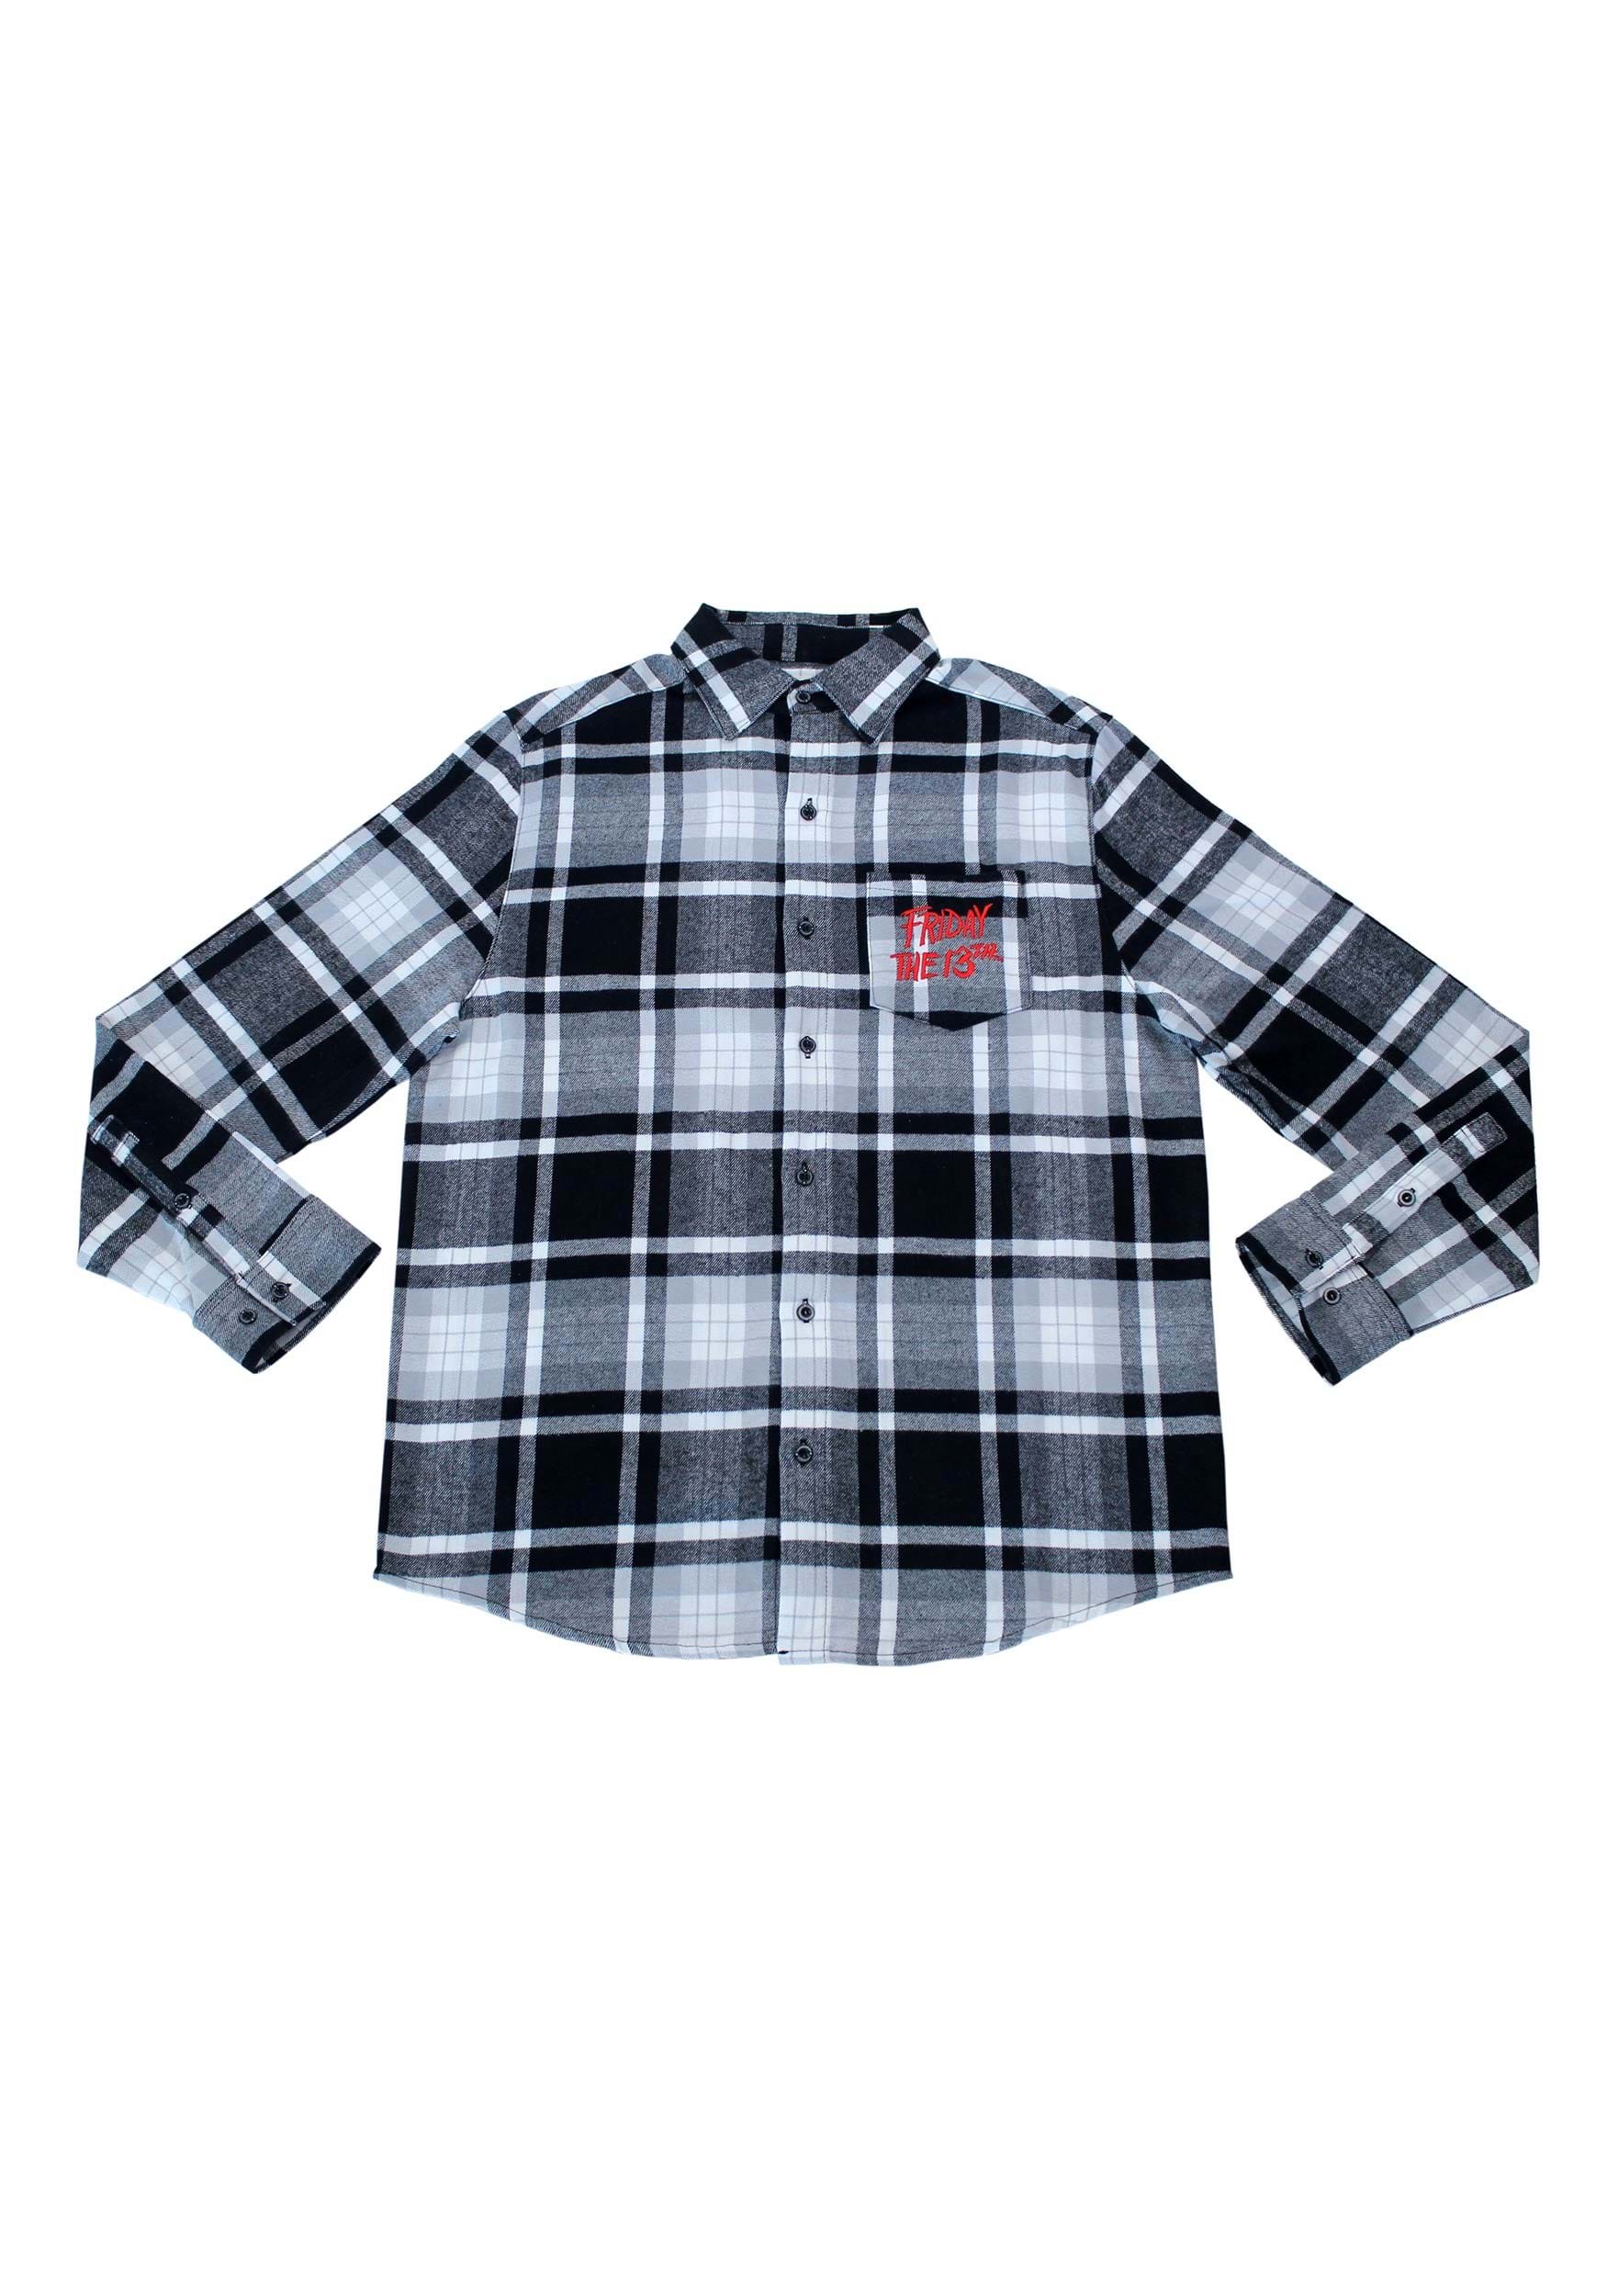 Adult Cakeworthy Friday the 13th Flannel Long Sleeve Shirt